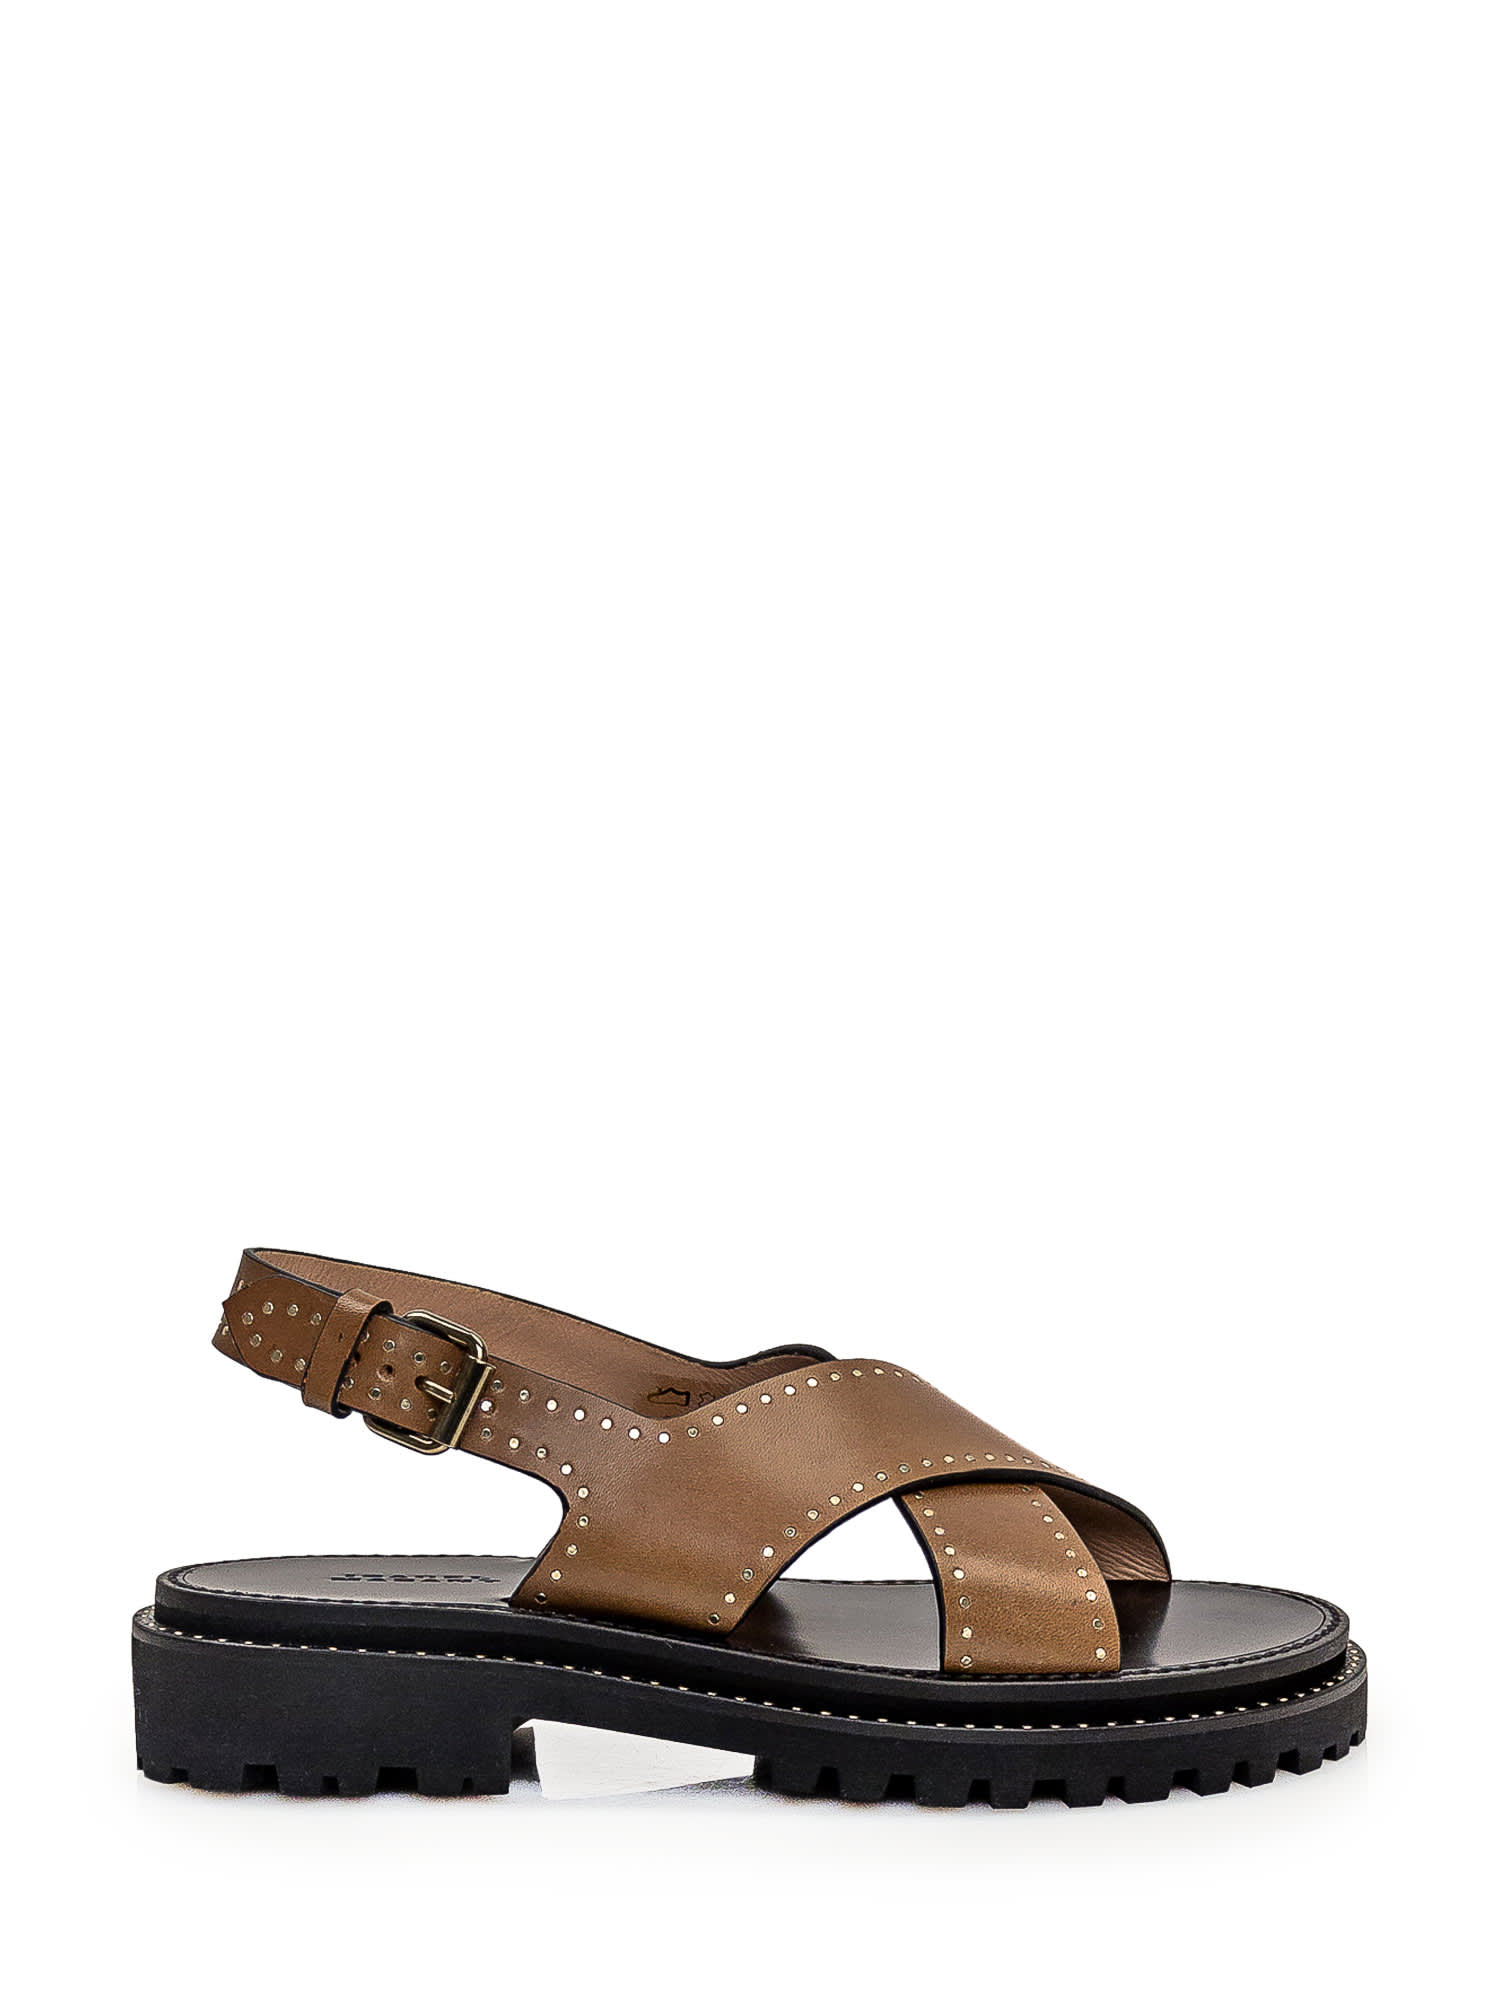 Sandal With Studs